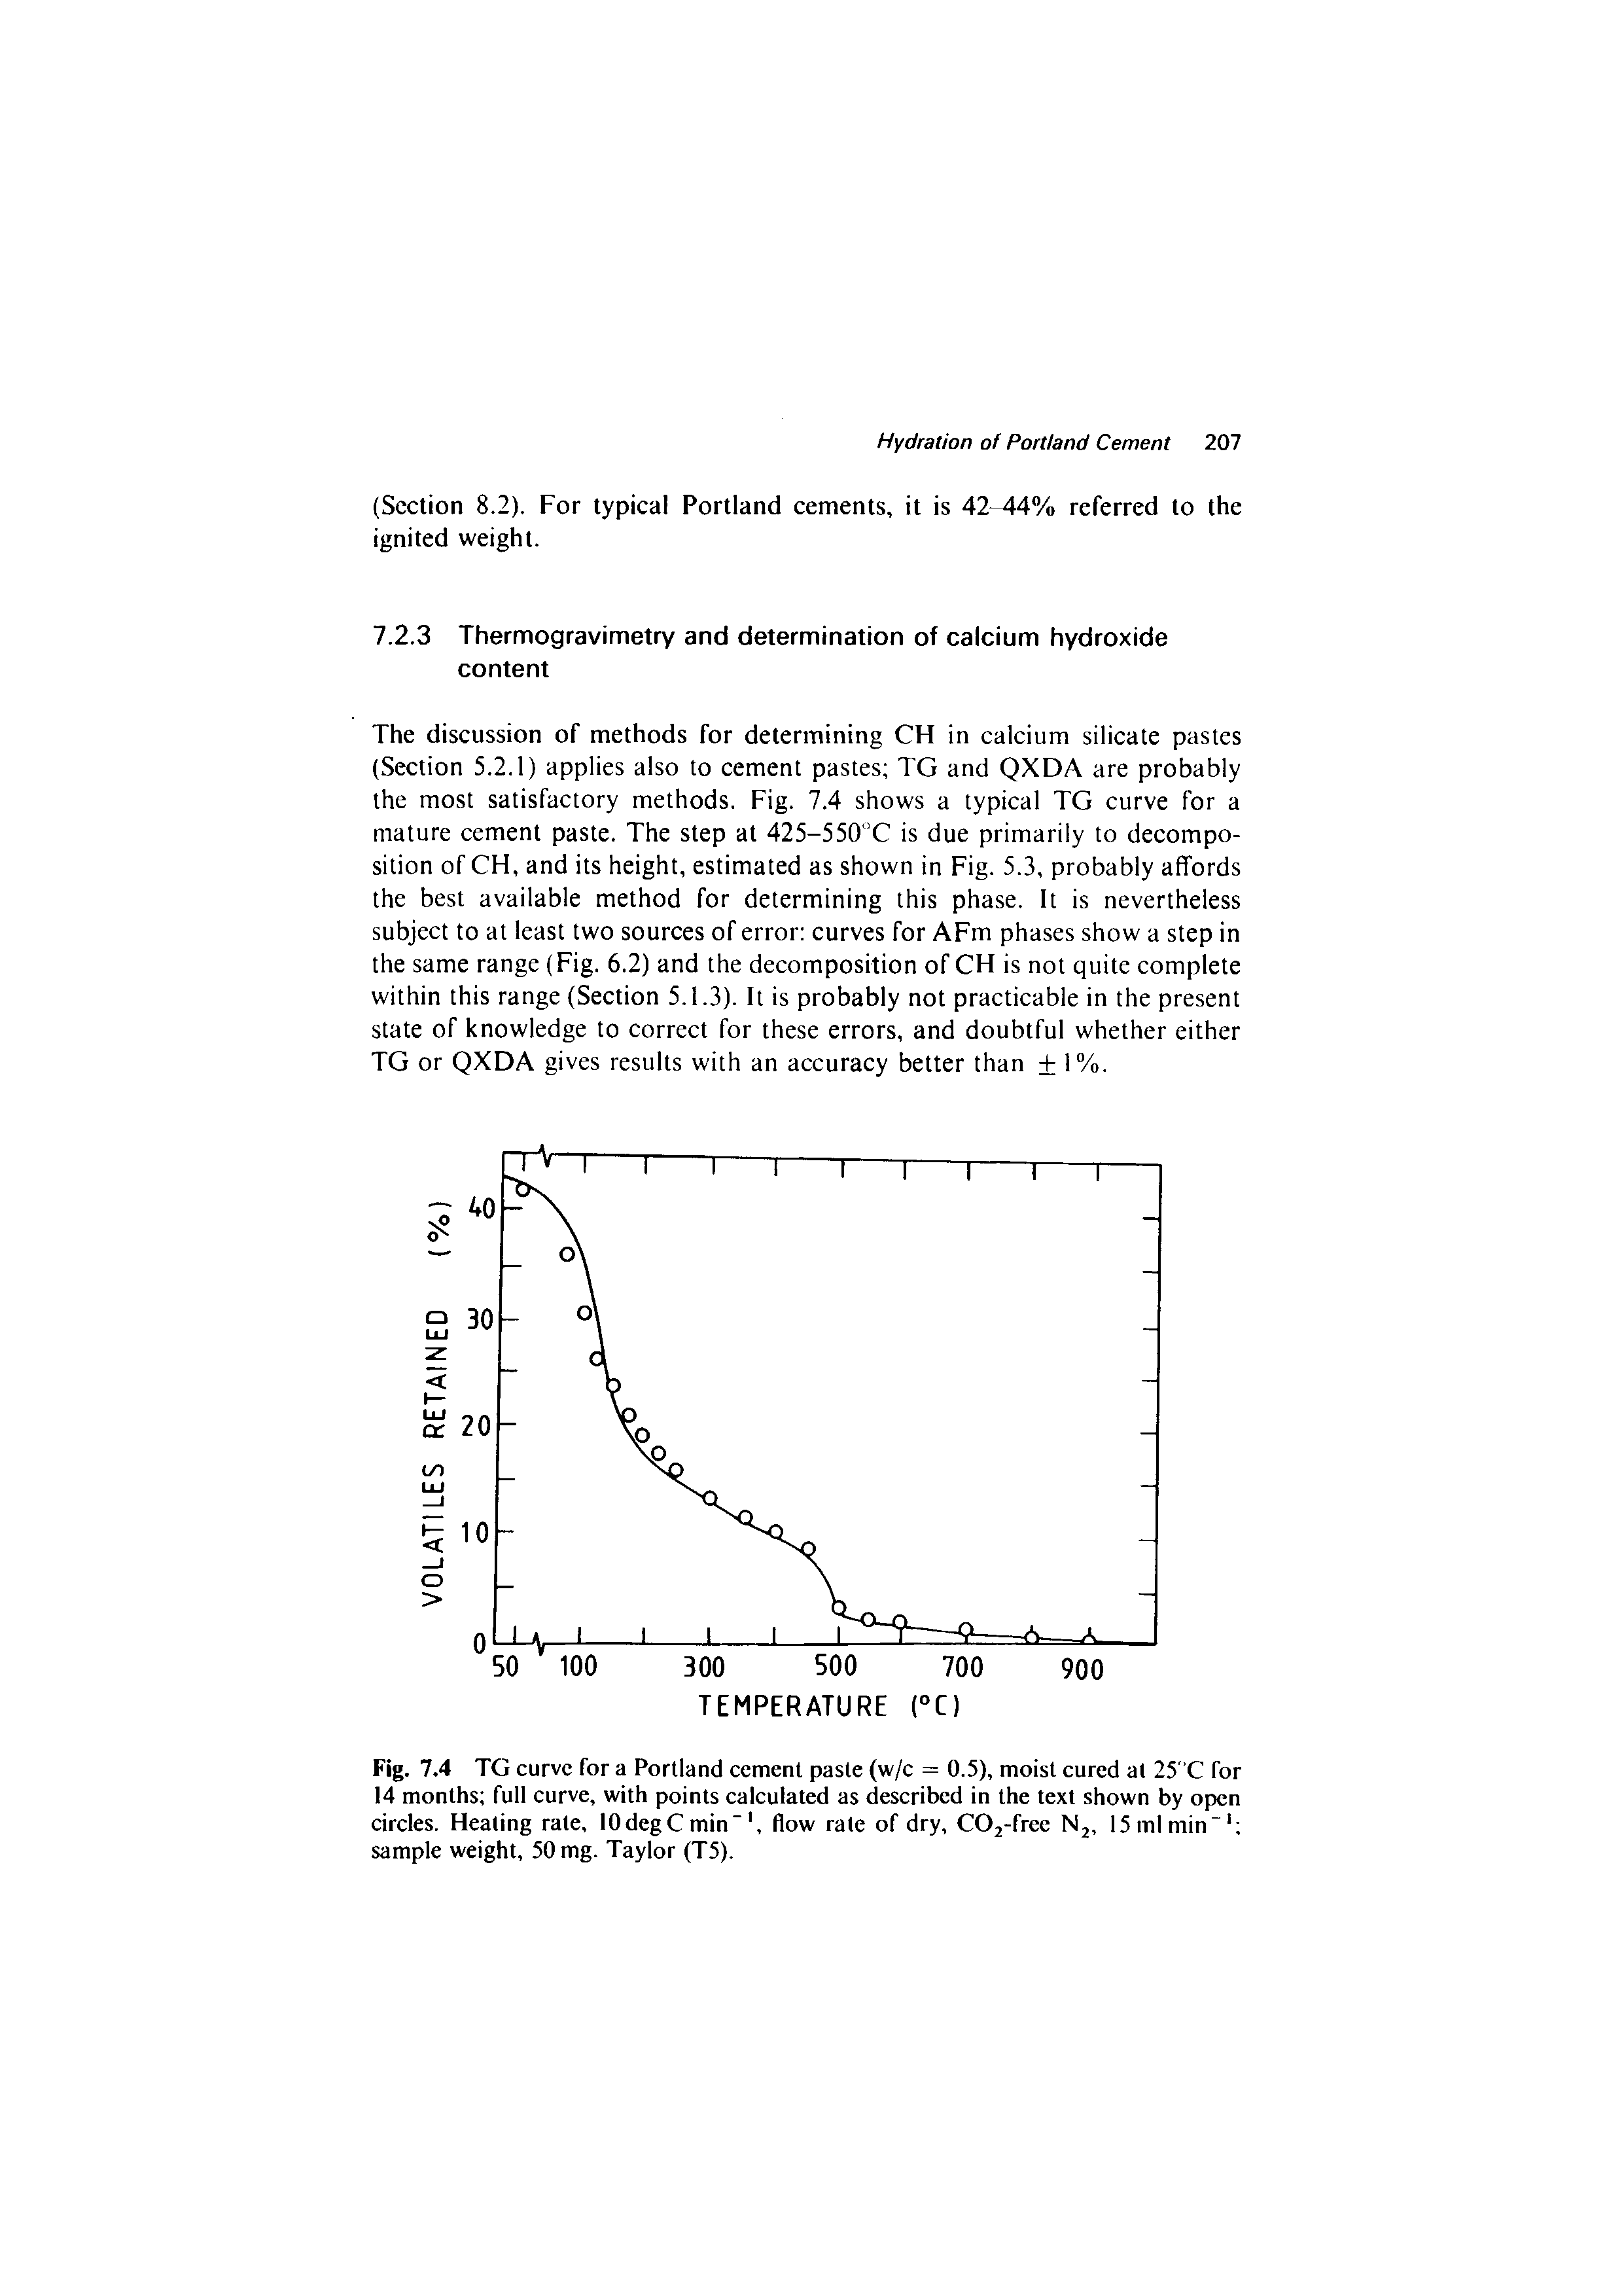 Fig. 7.4 TG curve for a Portland cement paste (w/c = 0.5), moist cured at 25"C for 14 months full curve, with points calculated as described in the text shown by open circles. Heating rate, lOdegCmin , flow rate of dry, COj-free Nj, I5mlmin sample weight, 50 mg. Taylor (T5).